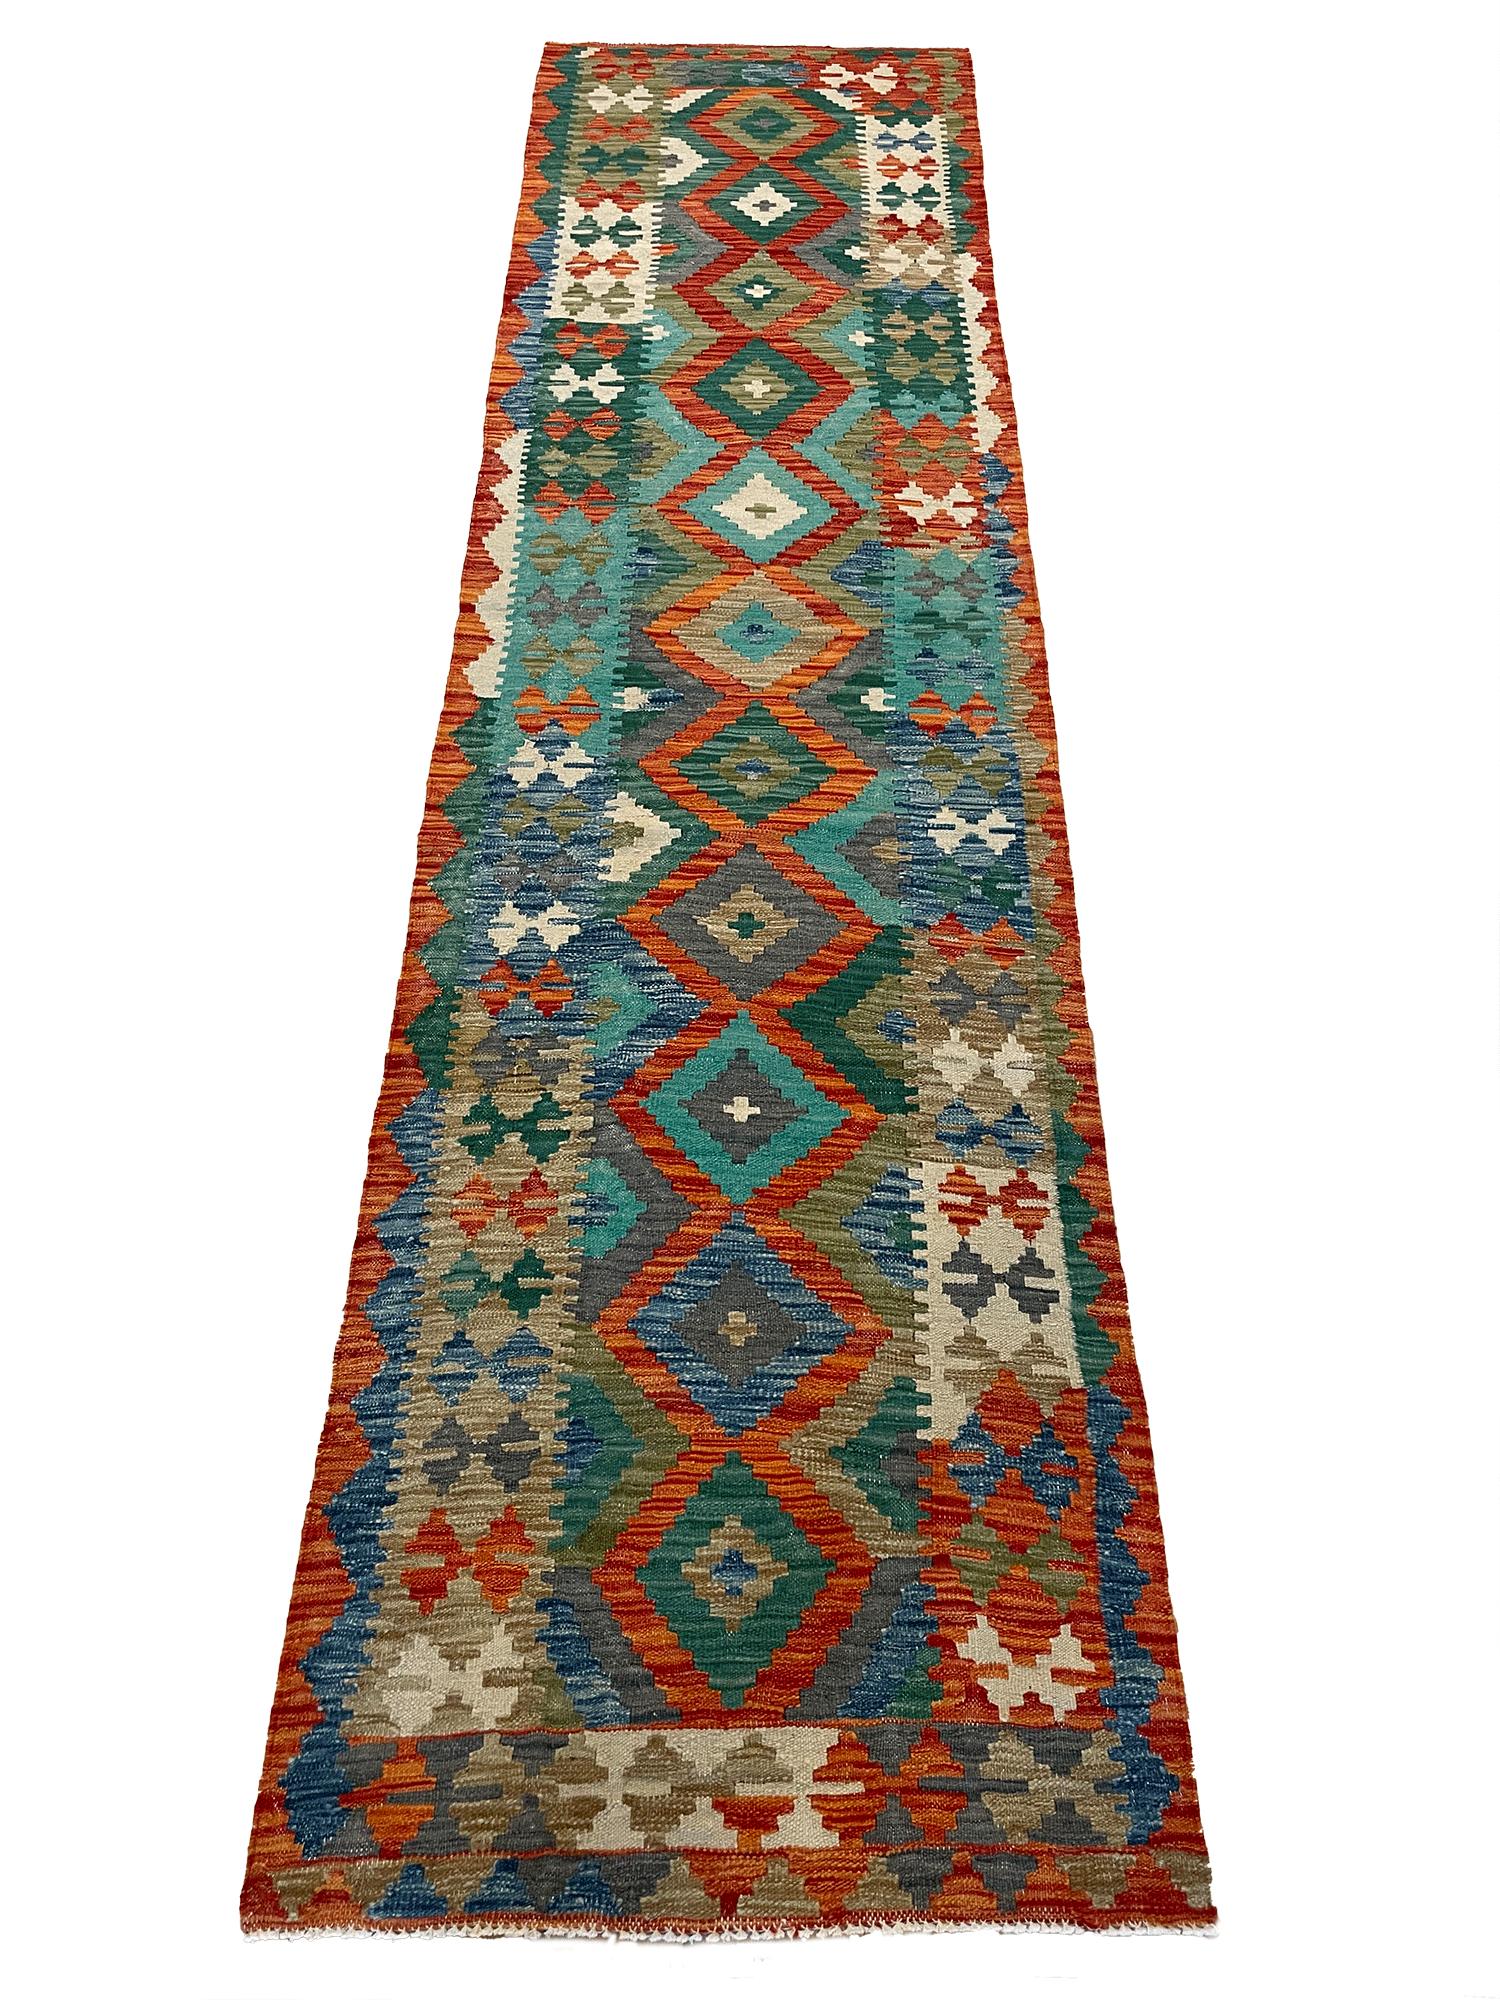 Fantastic quality, reversible, all wool with vegetable dyes. Measures: 2′ 6″ x 9′ 7″.

Kilim, a word of Turkish origin, denotes a textile of many uses produced by one of several flatweaving techniques. They have a common or closely related